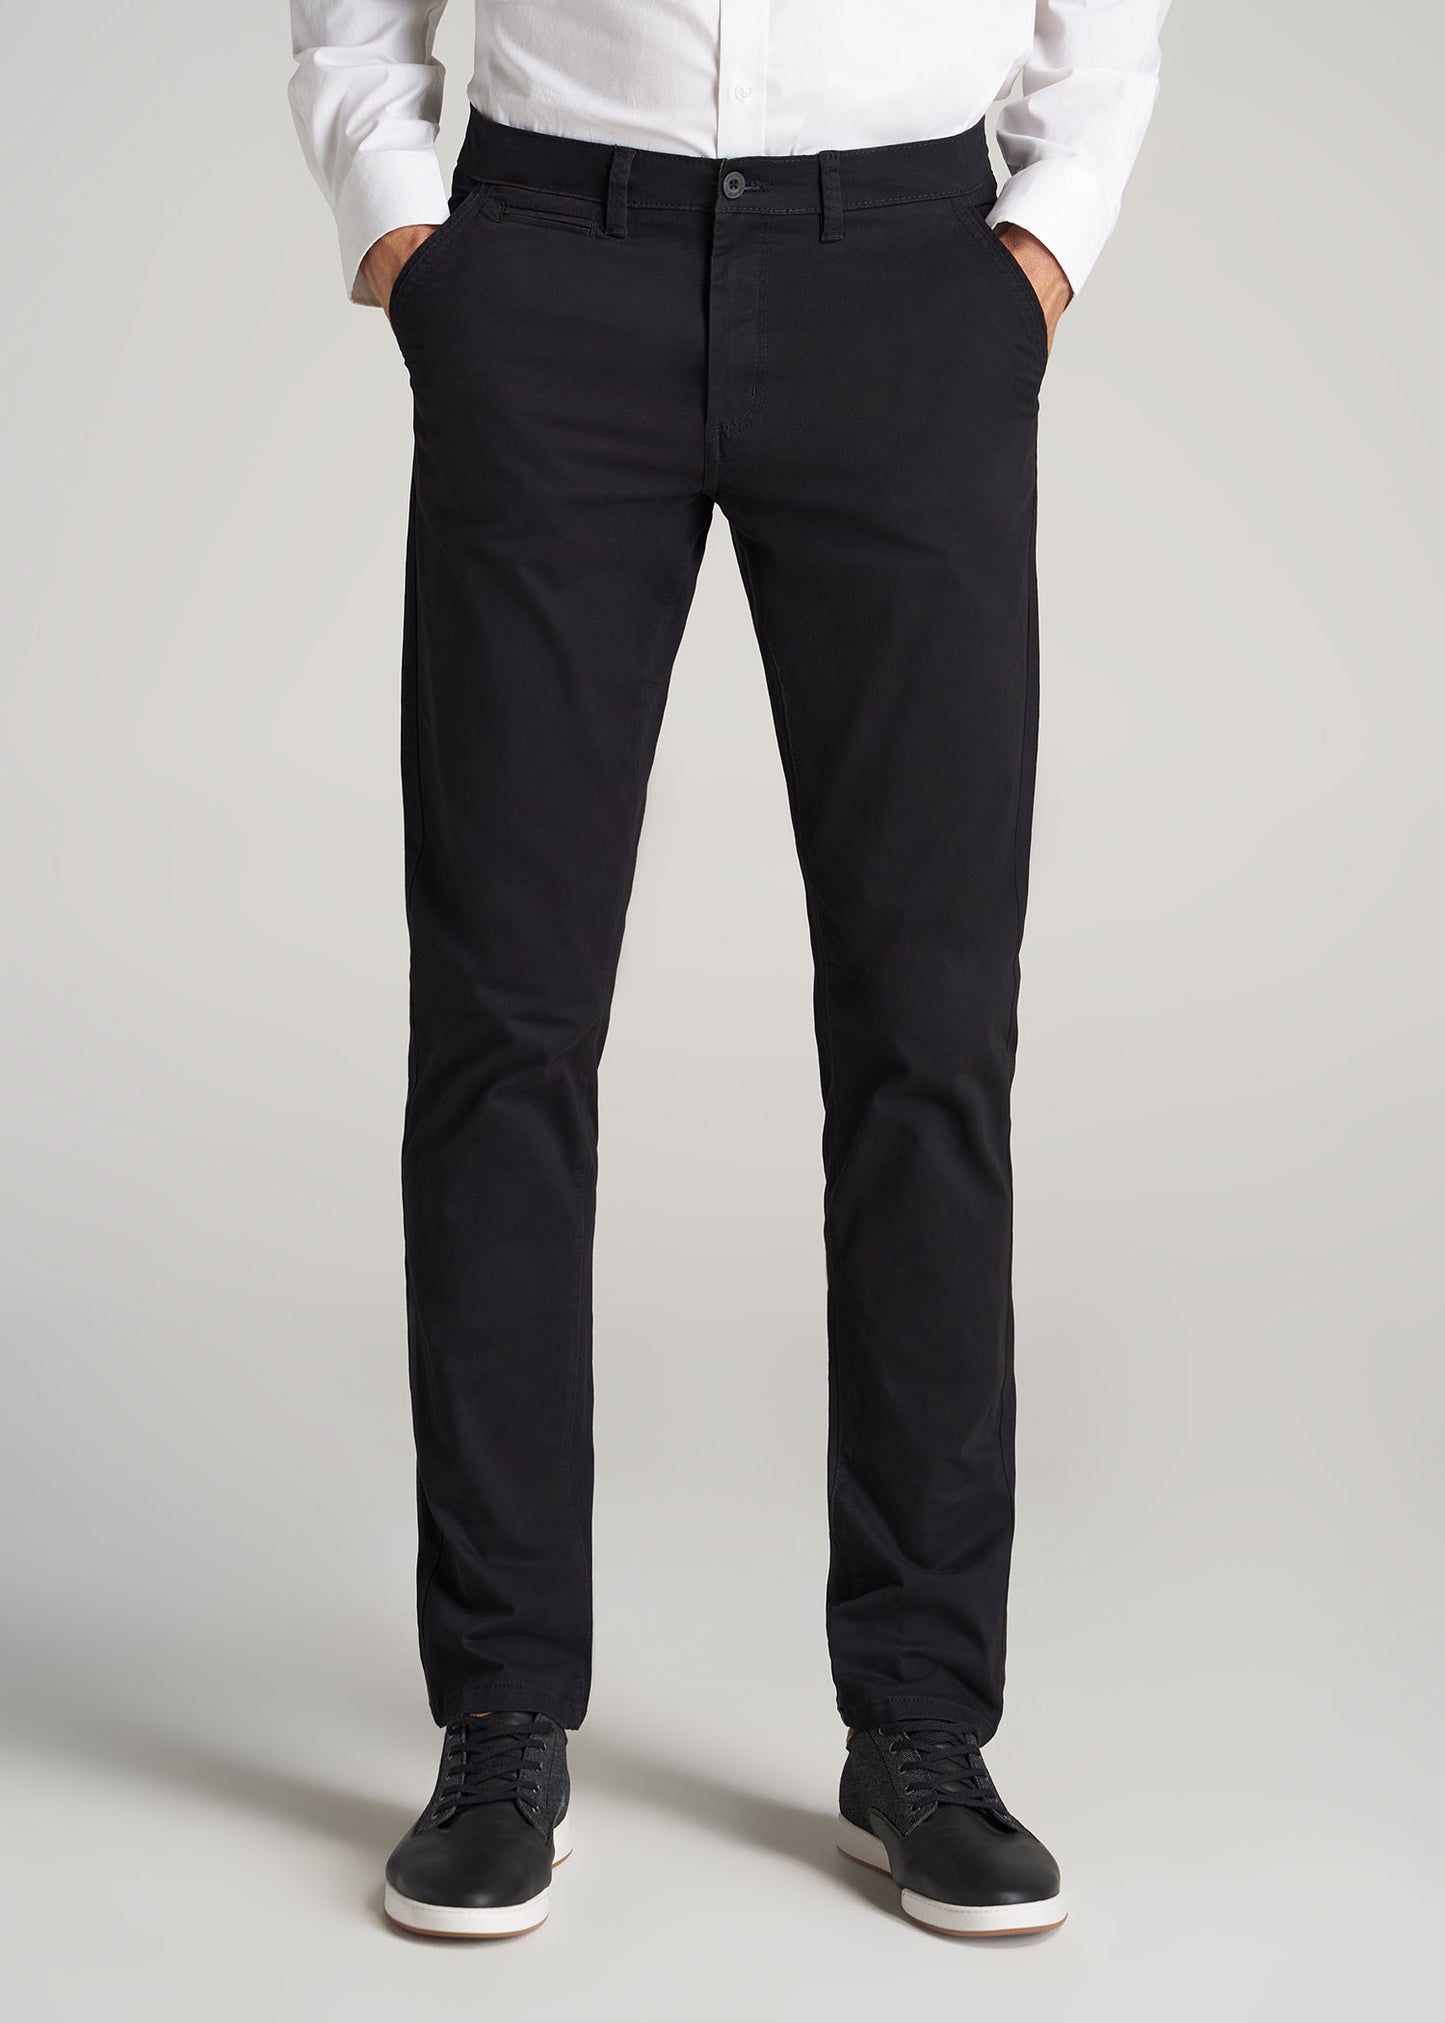 American-Elm Men's Slim Fit Stretchable Trouser. Job Work And Fabrication.  at Rs 319/piece | Noida | ID: 25377170862